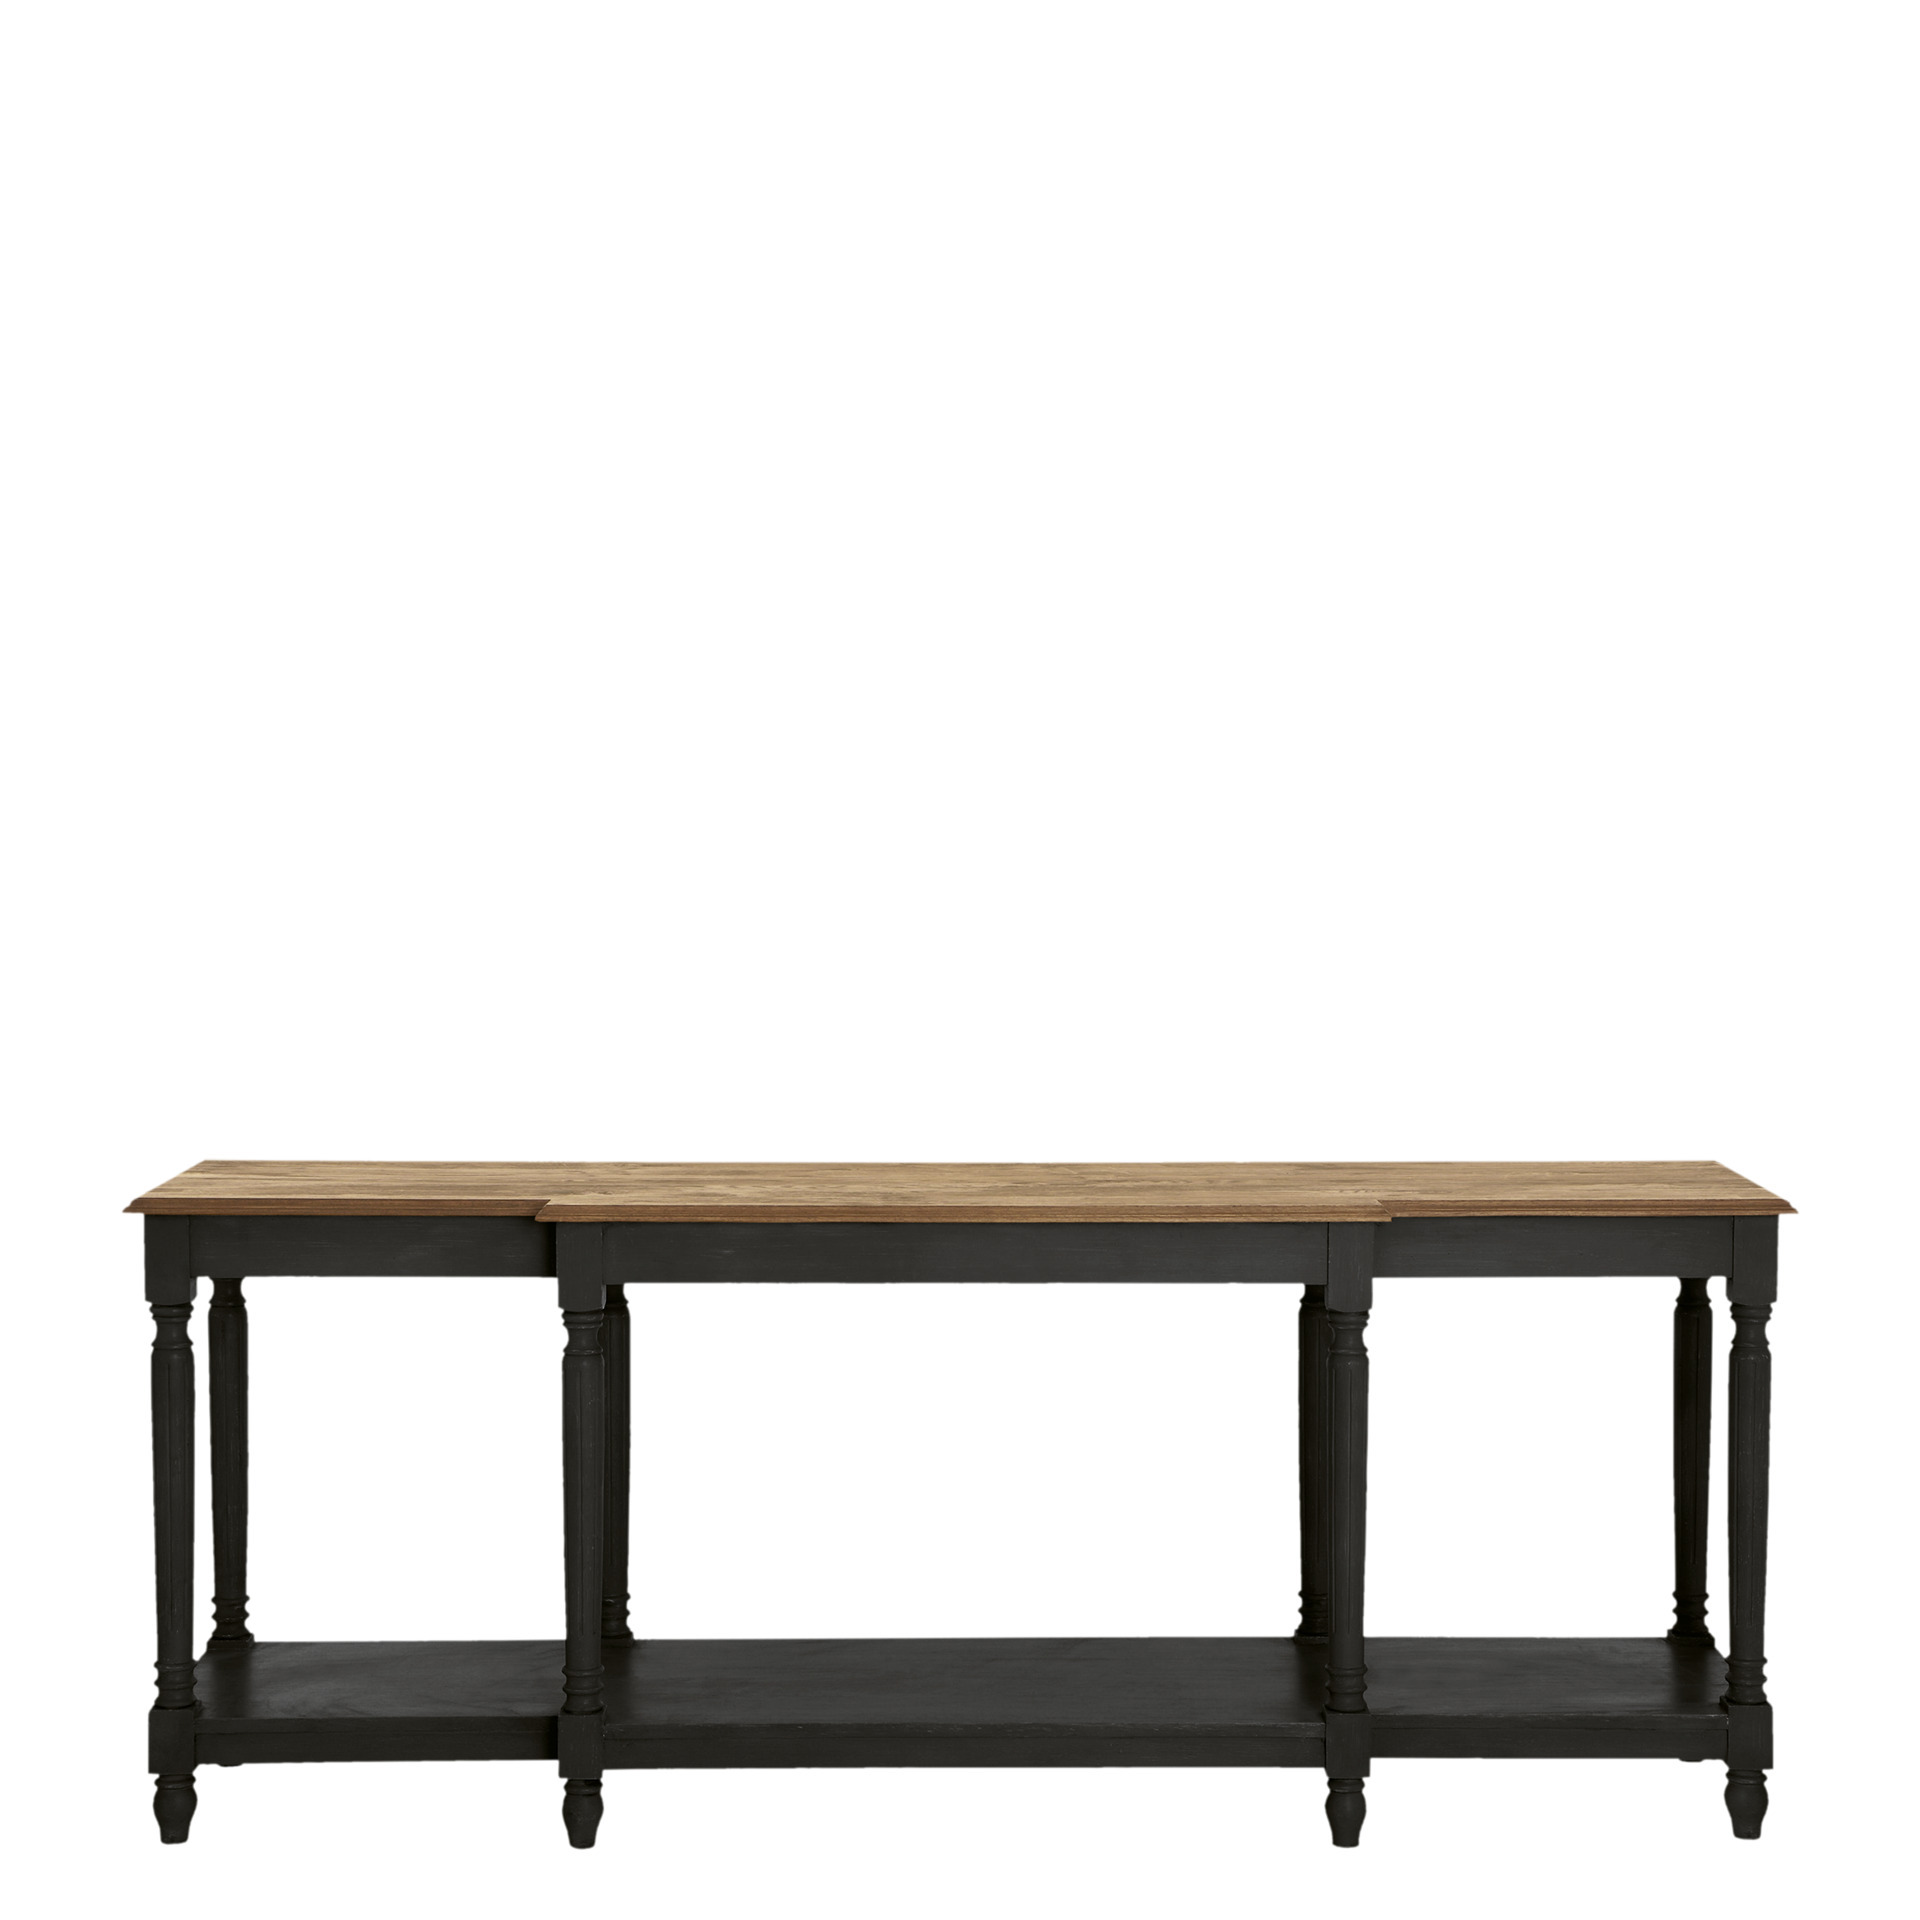 Upton Weathered Oak Top Console Table - Black